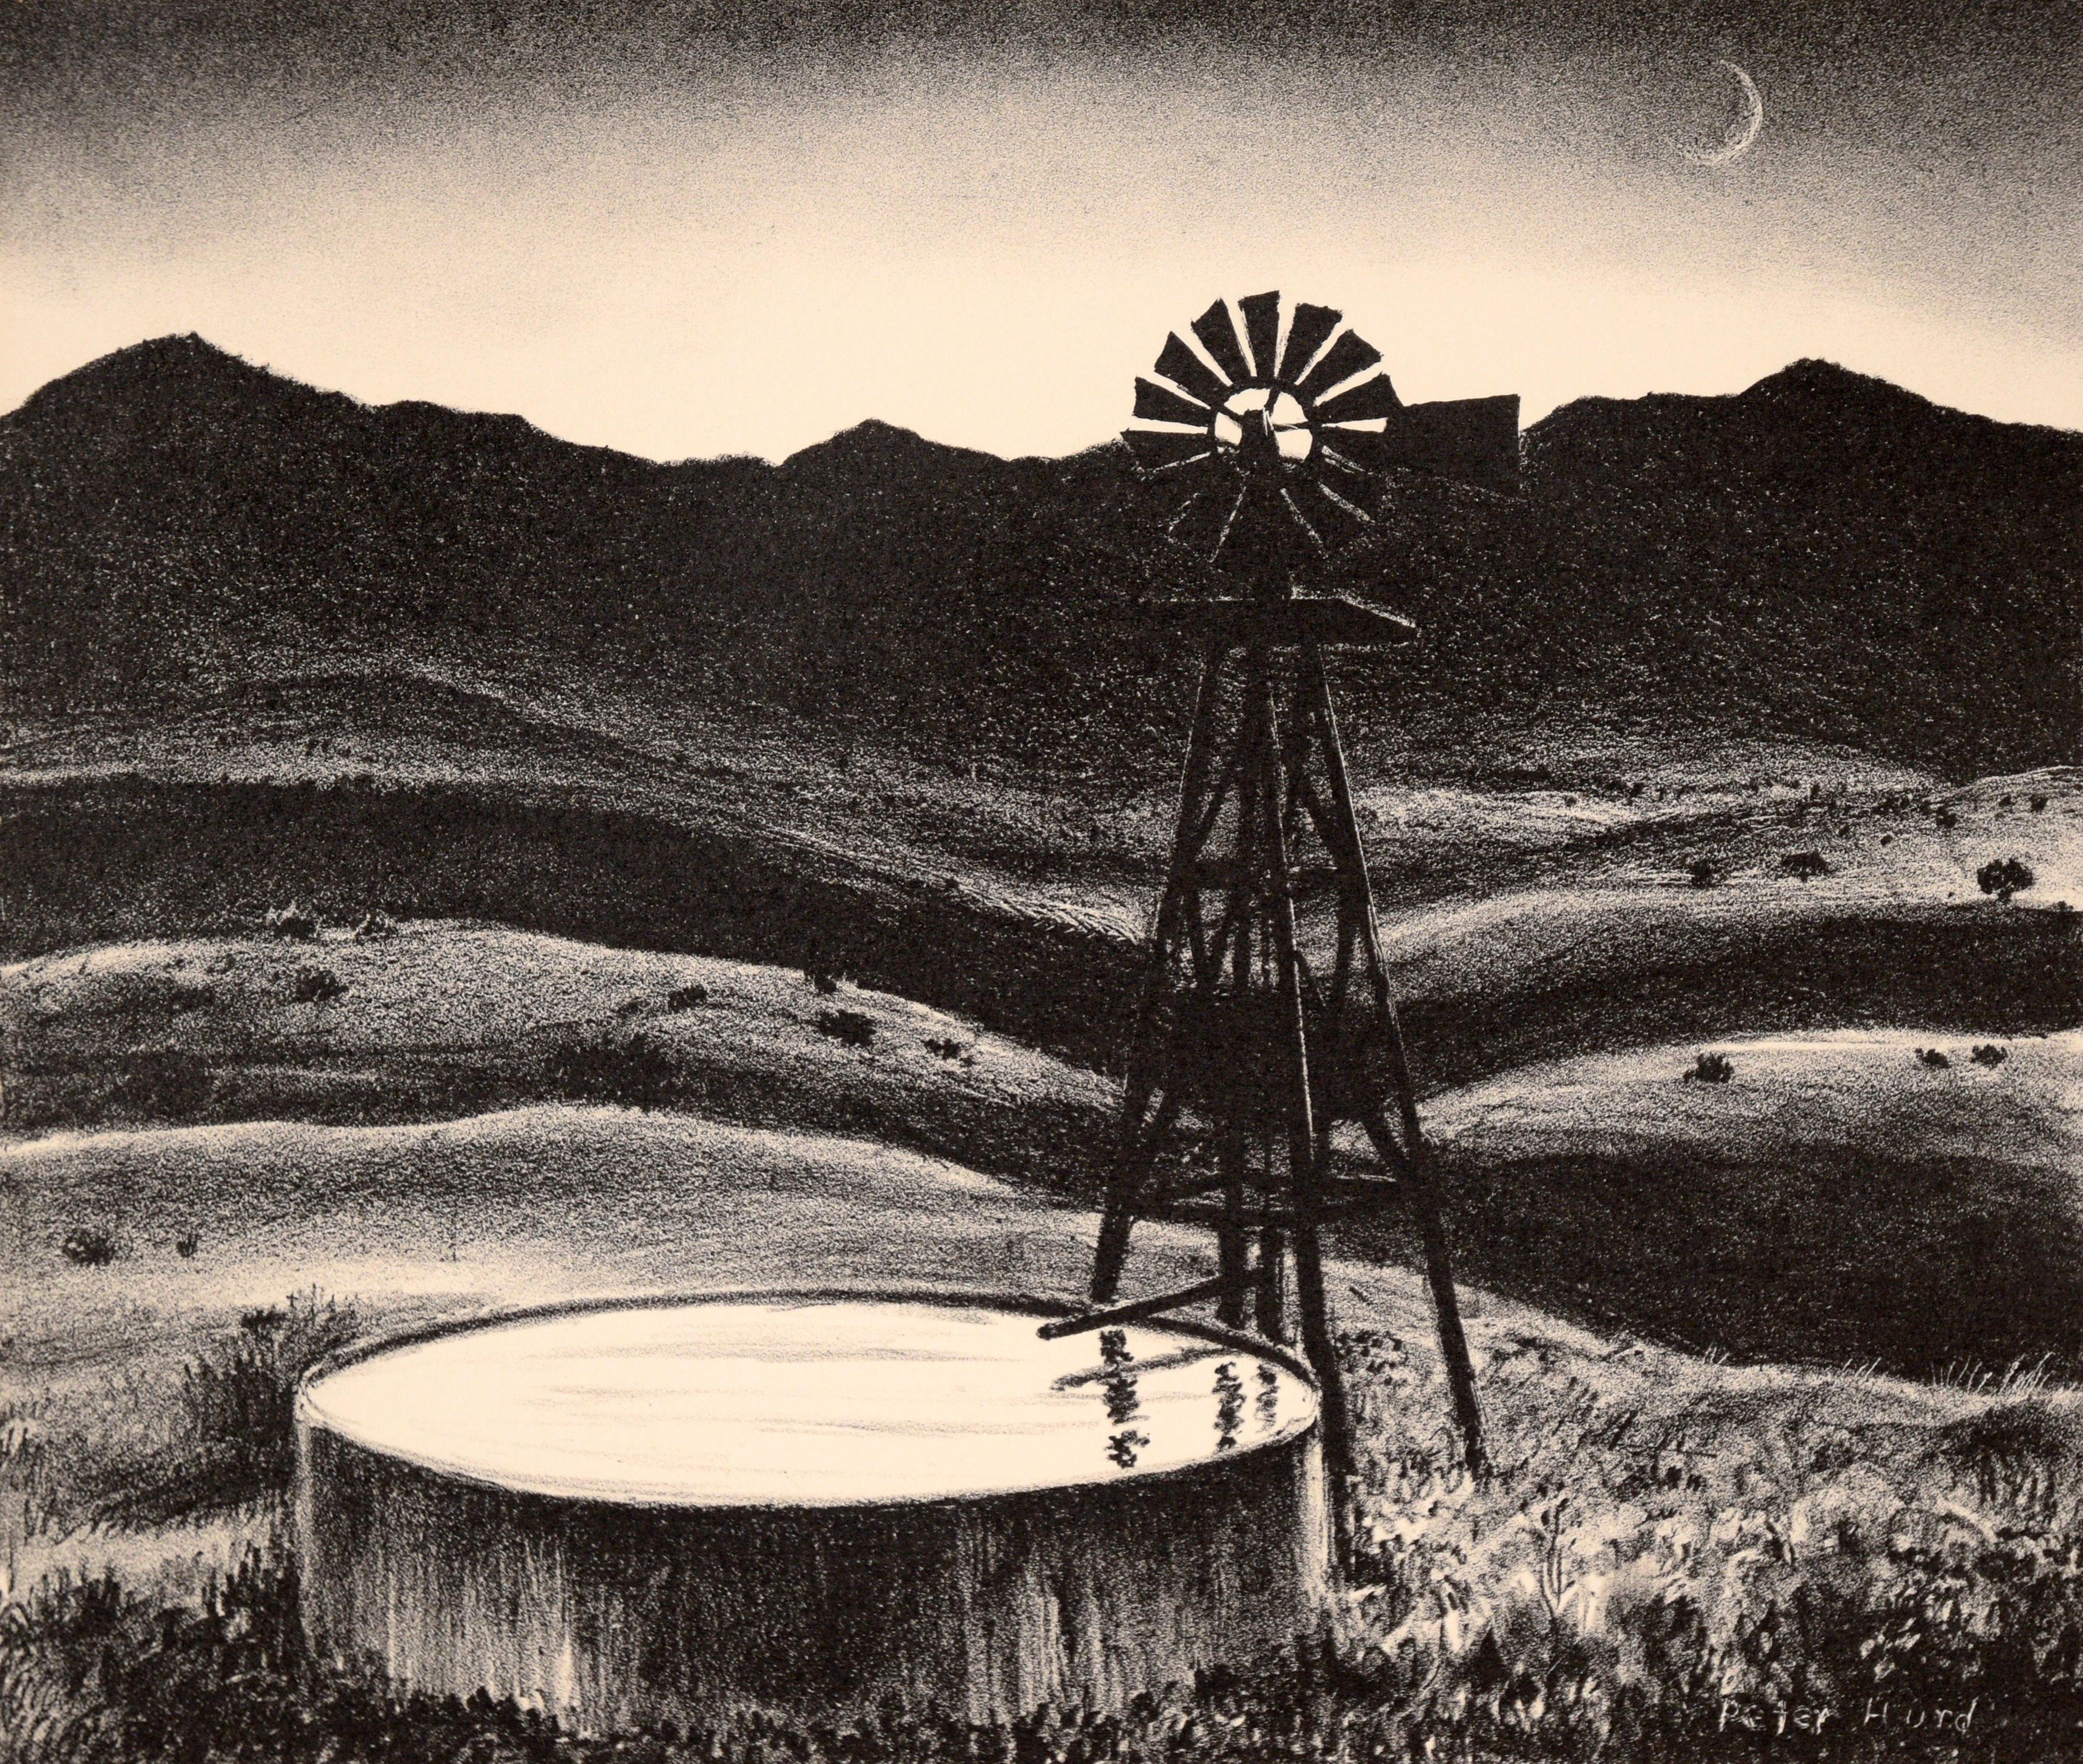 Windmill And Well At Dusk - Original Vintage Lithograph - Print by Peter Hurd